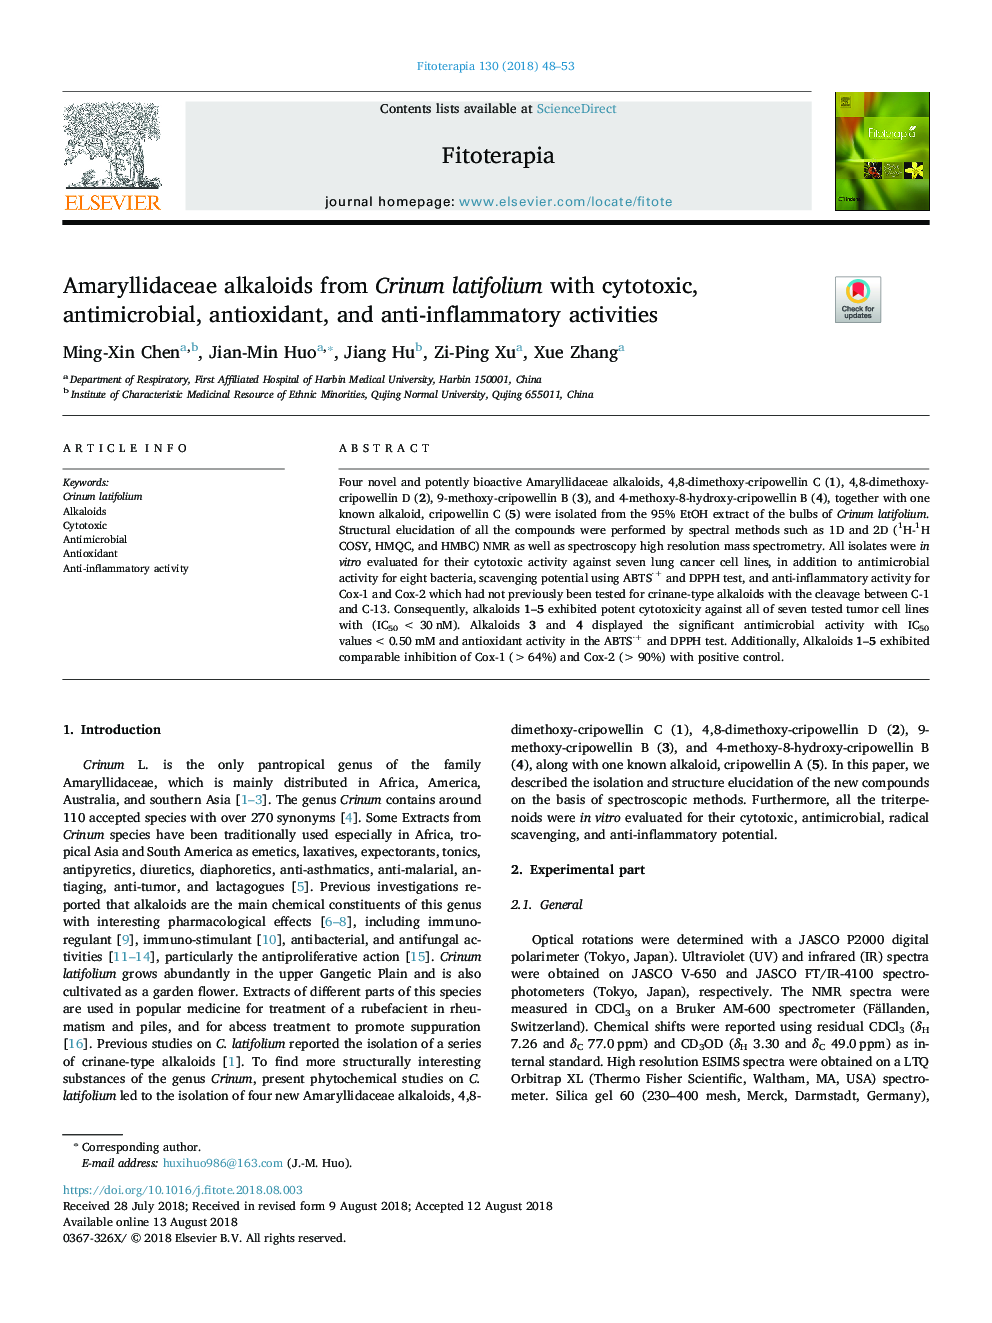 Amaryllidaceae alkaloids from Crinum latifolium with cytotoxic, antimicrobial, antioxidant, and anti-inflammatory activities